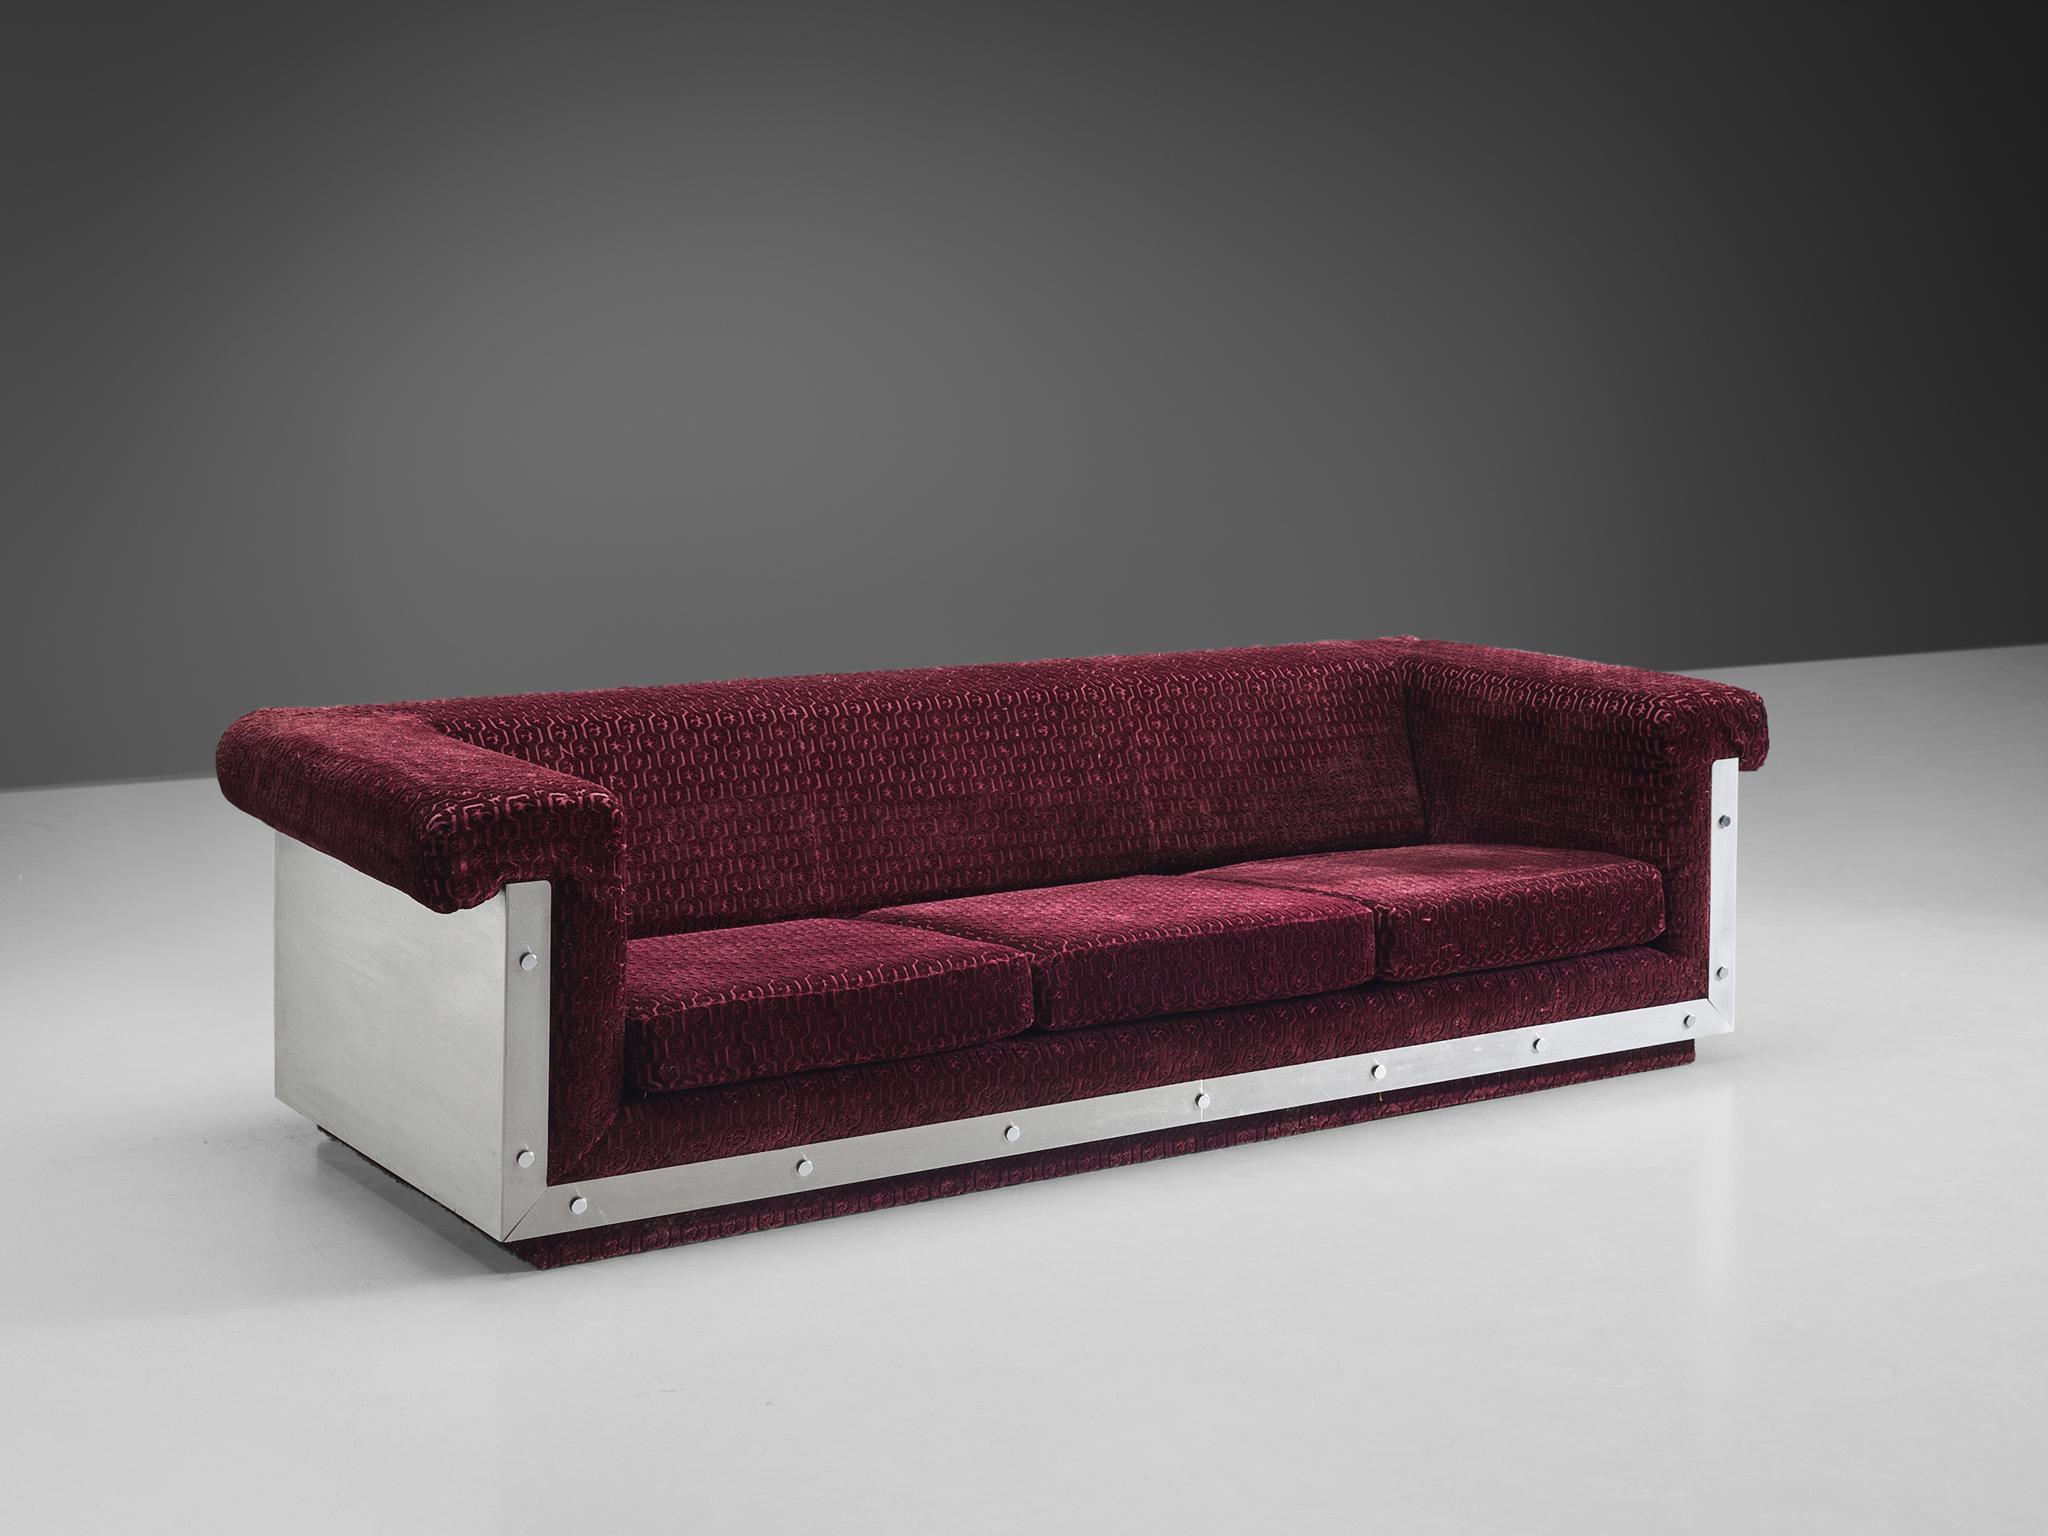 Sofa, steel, fabric, France, late 1960s

Modern and sleek sofa in stainless steel and velvet patterned upholstery. This sofa has a very strong expression mostly created by the shimmering steel case. This base holds the cushions, upholstered in a